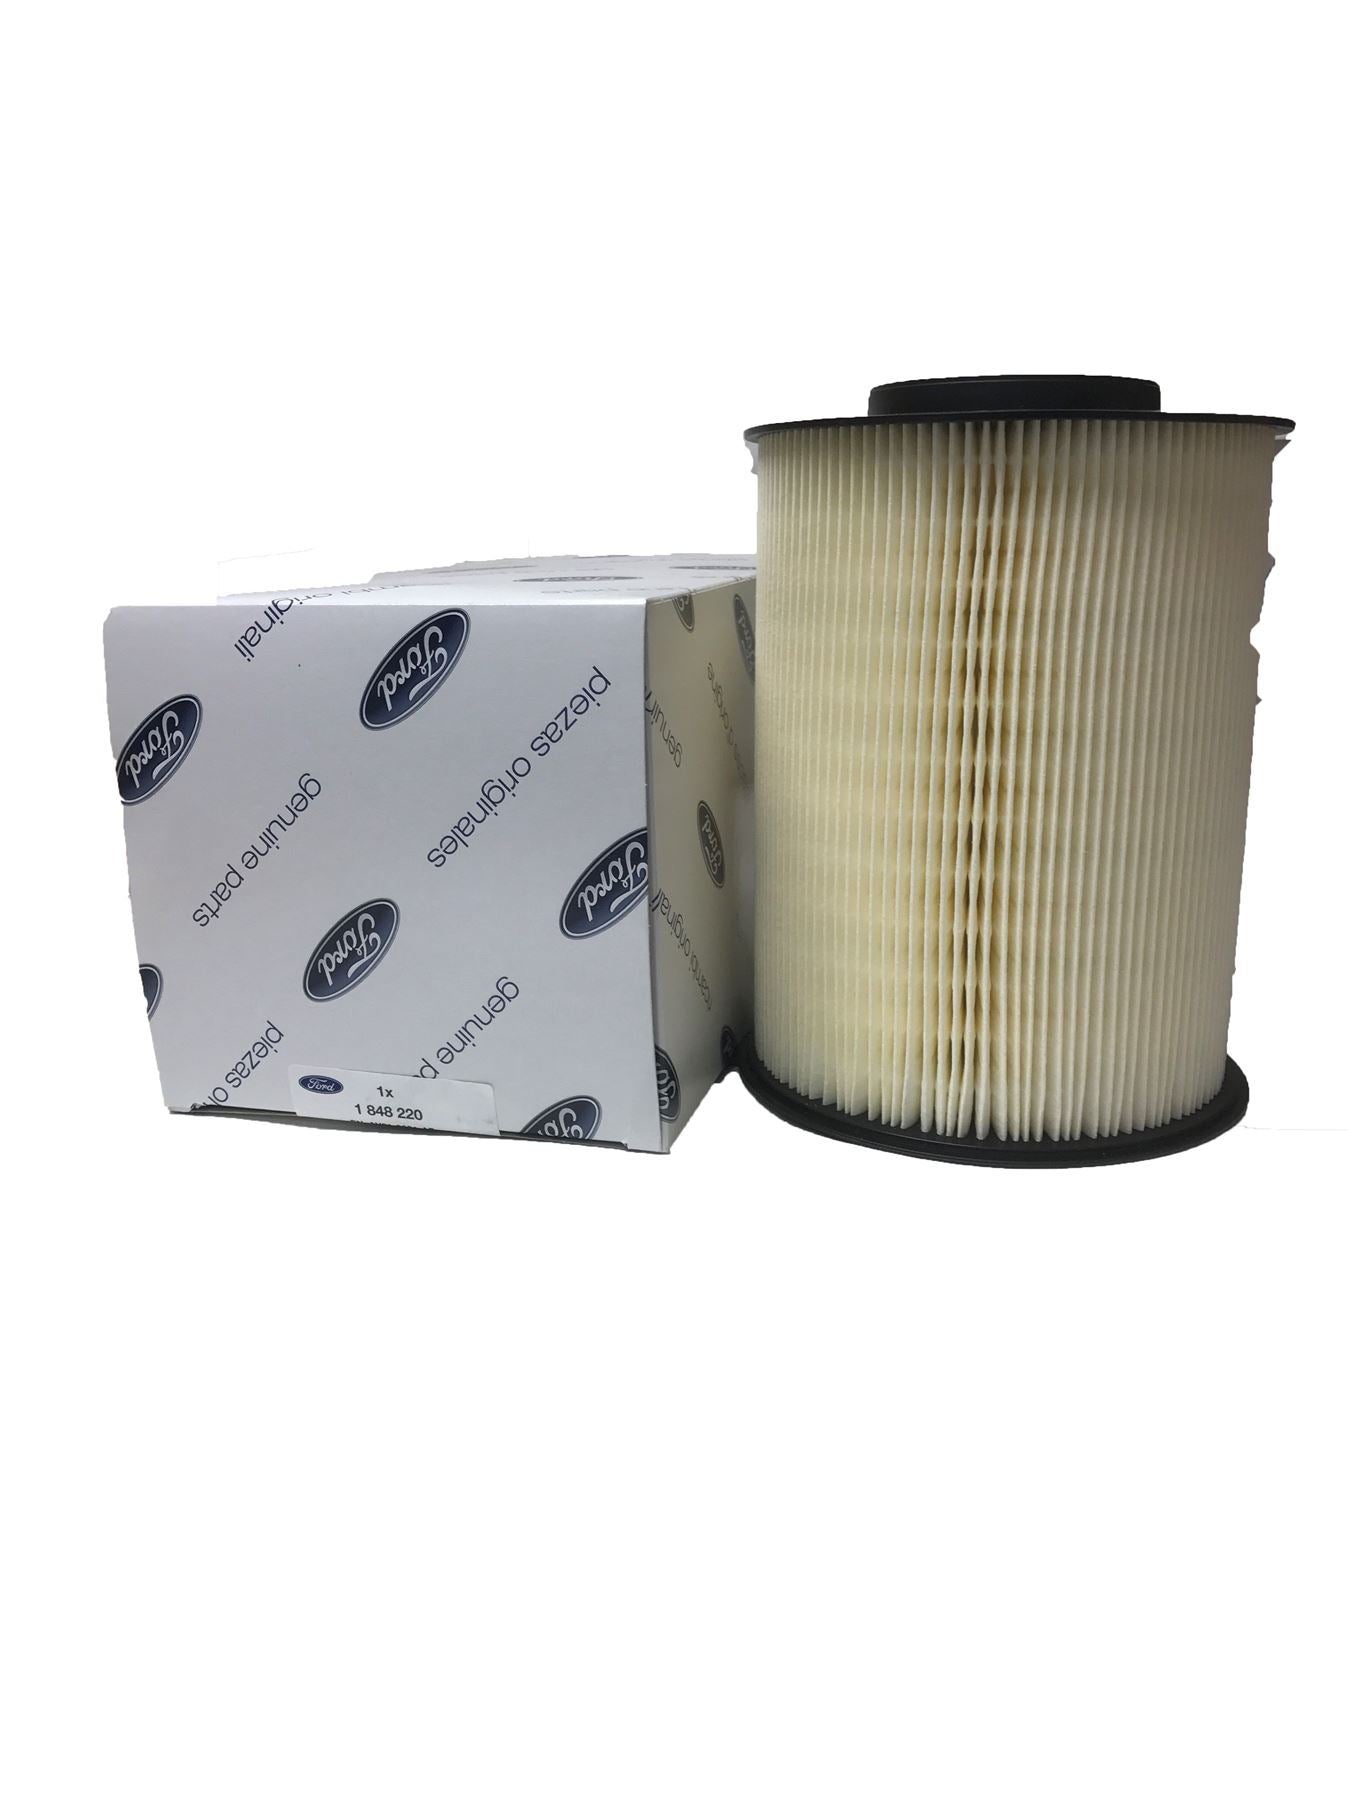 GENUINE FORD C-MAX  1.6 TDCi 02.07 - 09.10 - 90HP ROUND TYPE AIR FILTER 1848220